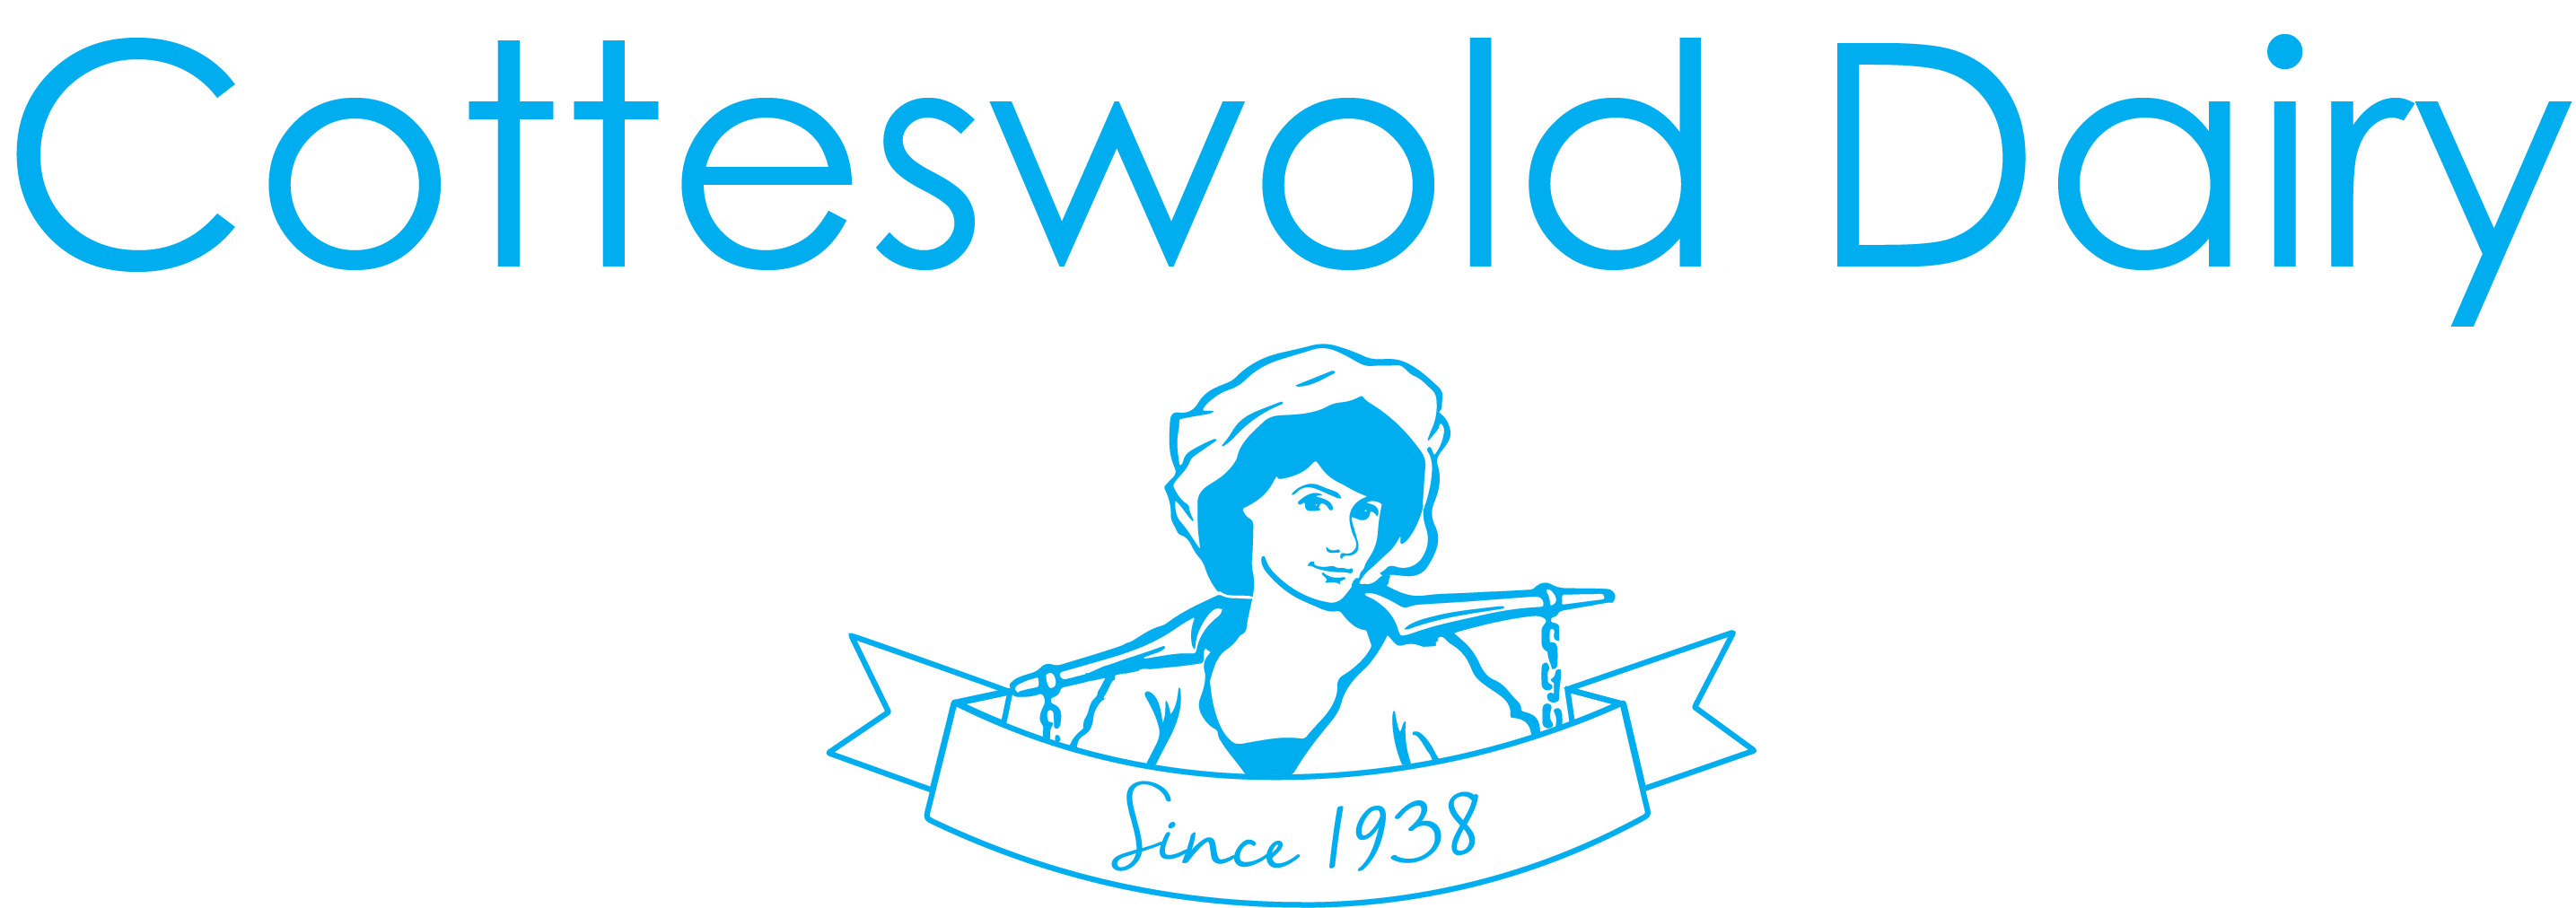 COTTESWOLD DAIRY NEW Logo